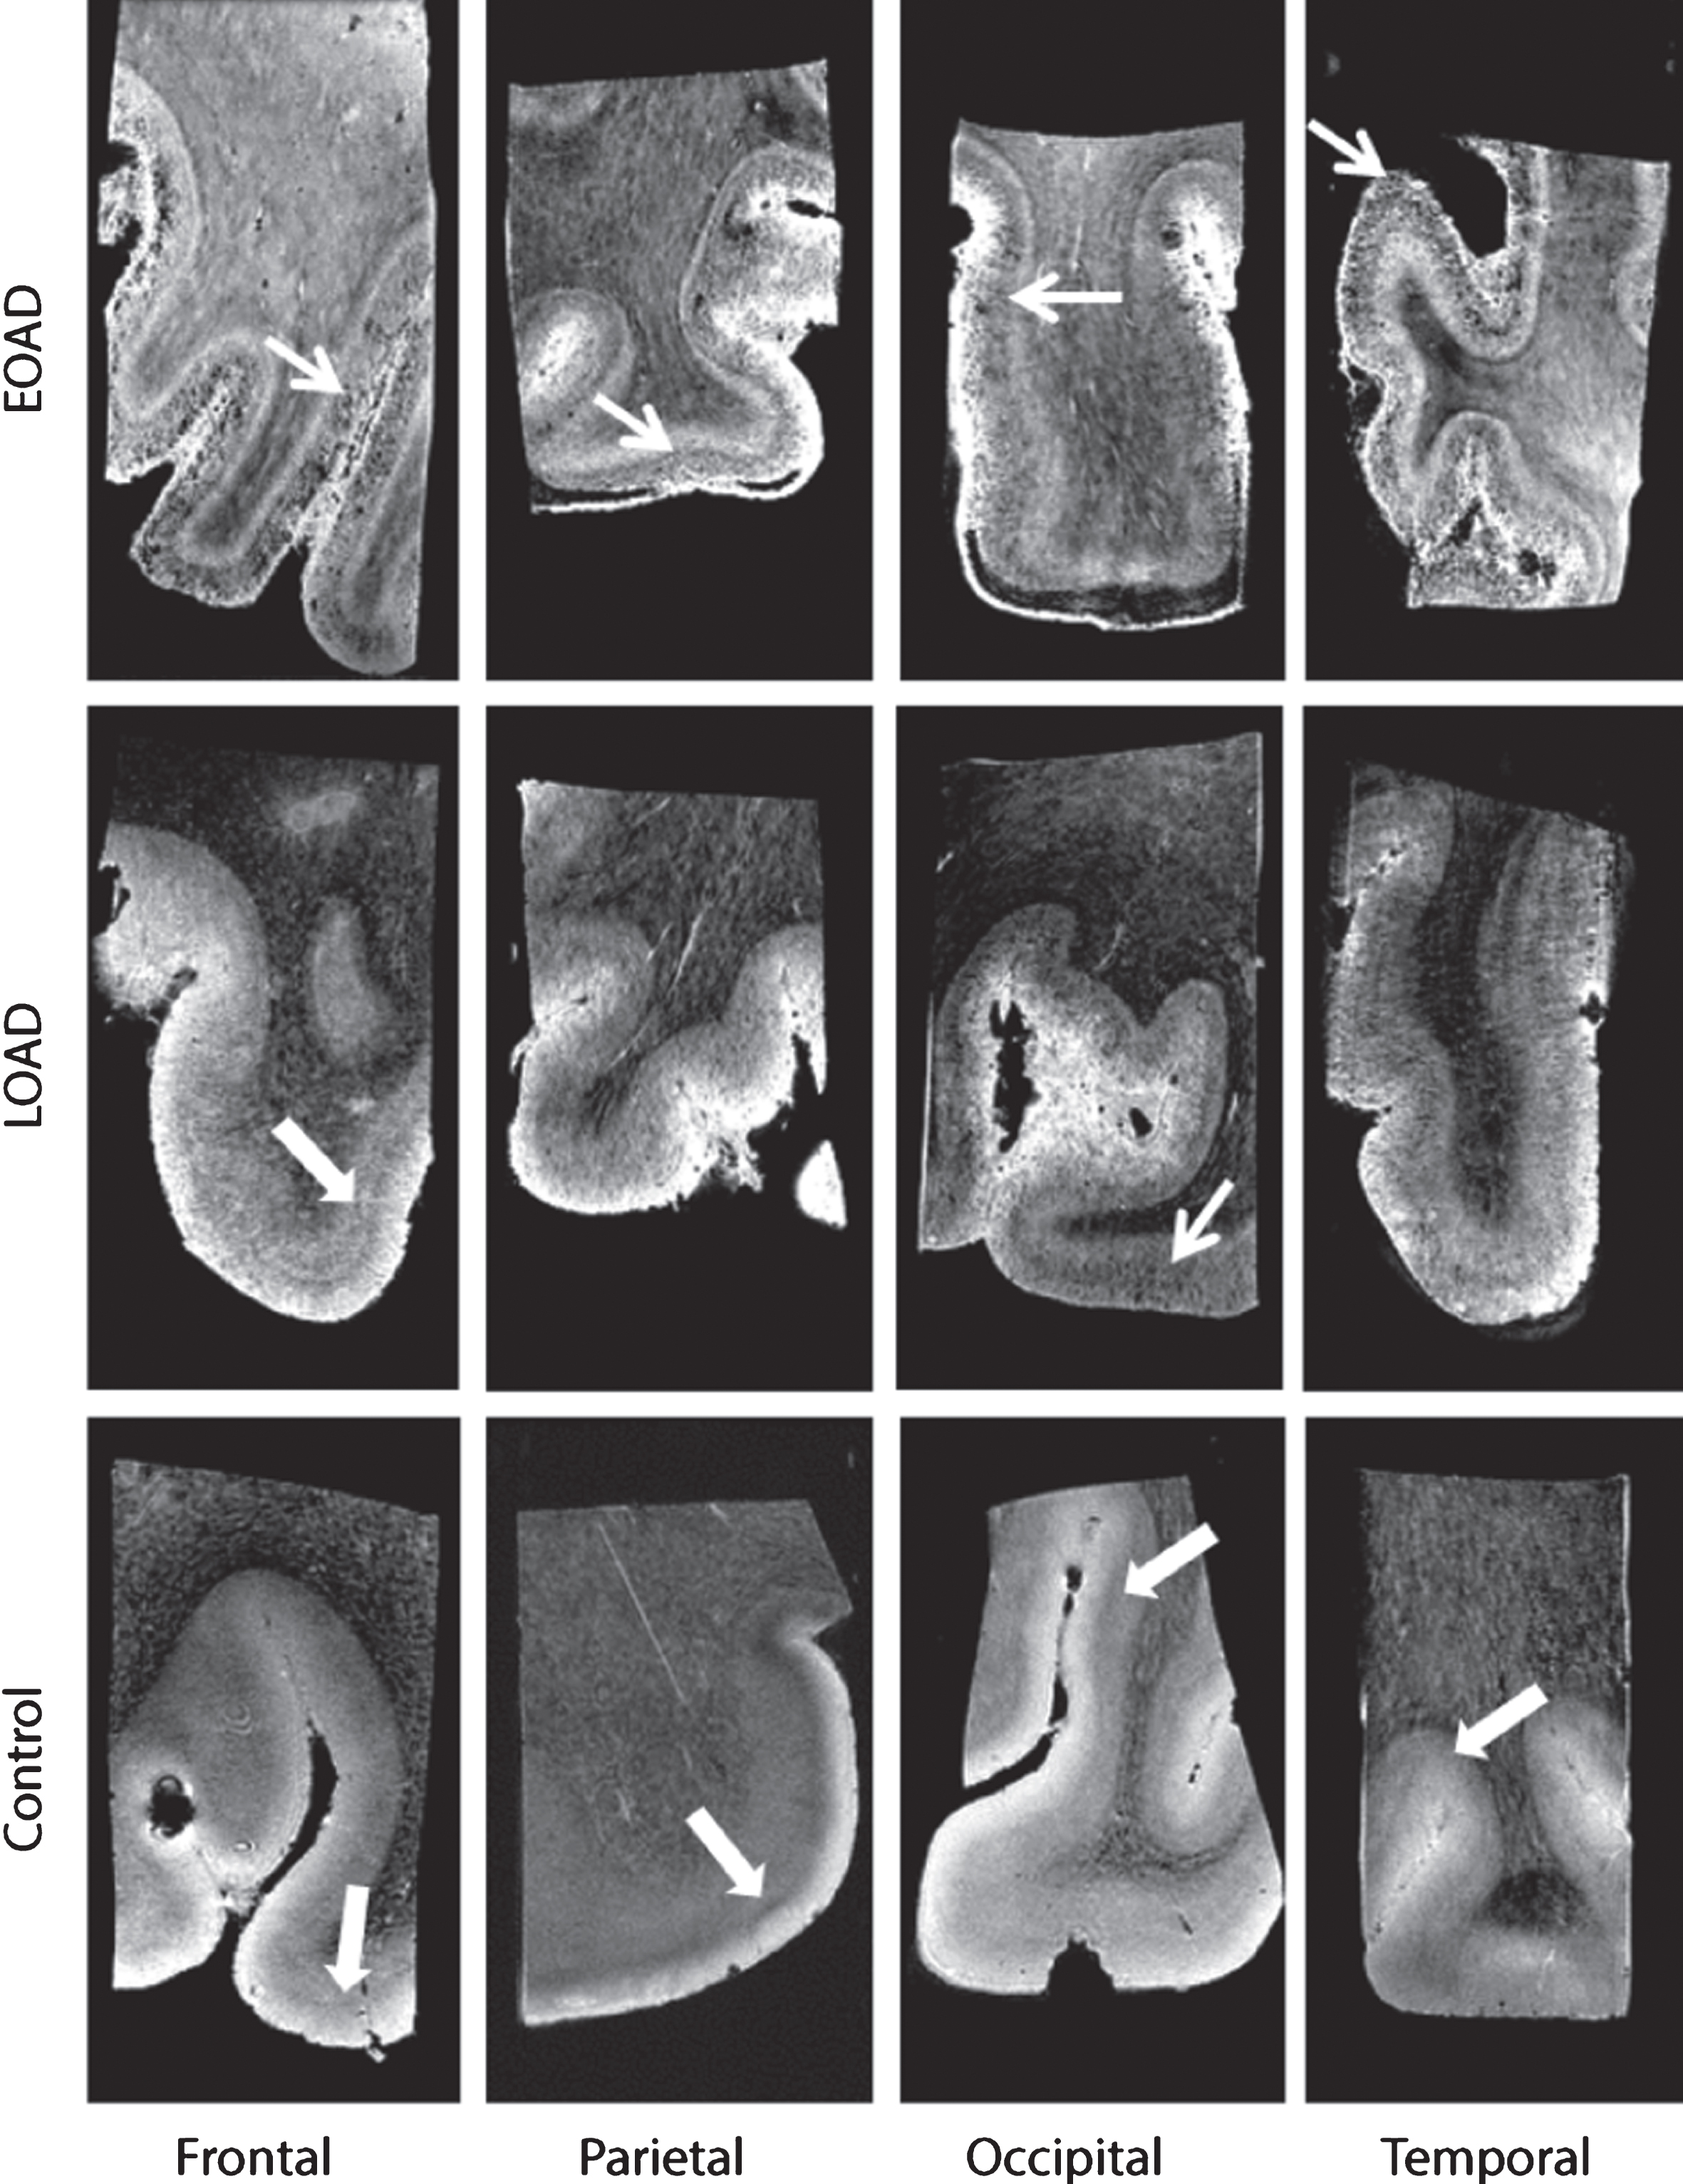 Representative MRI images of a control, LOAD, and EOAD subject. Control subjects were characterized by a normal cortex defined as a homogeneous cortex including normal cortical lamination (thick arrow). AD patients have a different cortical appearance on T2*-weighted MRI compared to control subjects. The cortex of AD patients is characterized by inhomogeneities (granular and/or patchy structure and foci of signal loss) and a diffuse hypointense band covering and obscuring the central layers of the cortex (arrow).